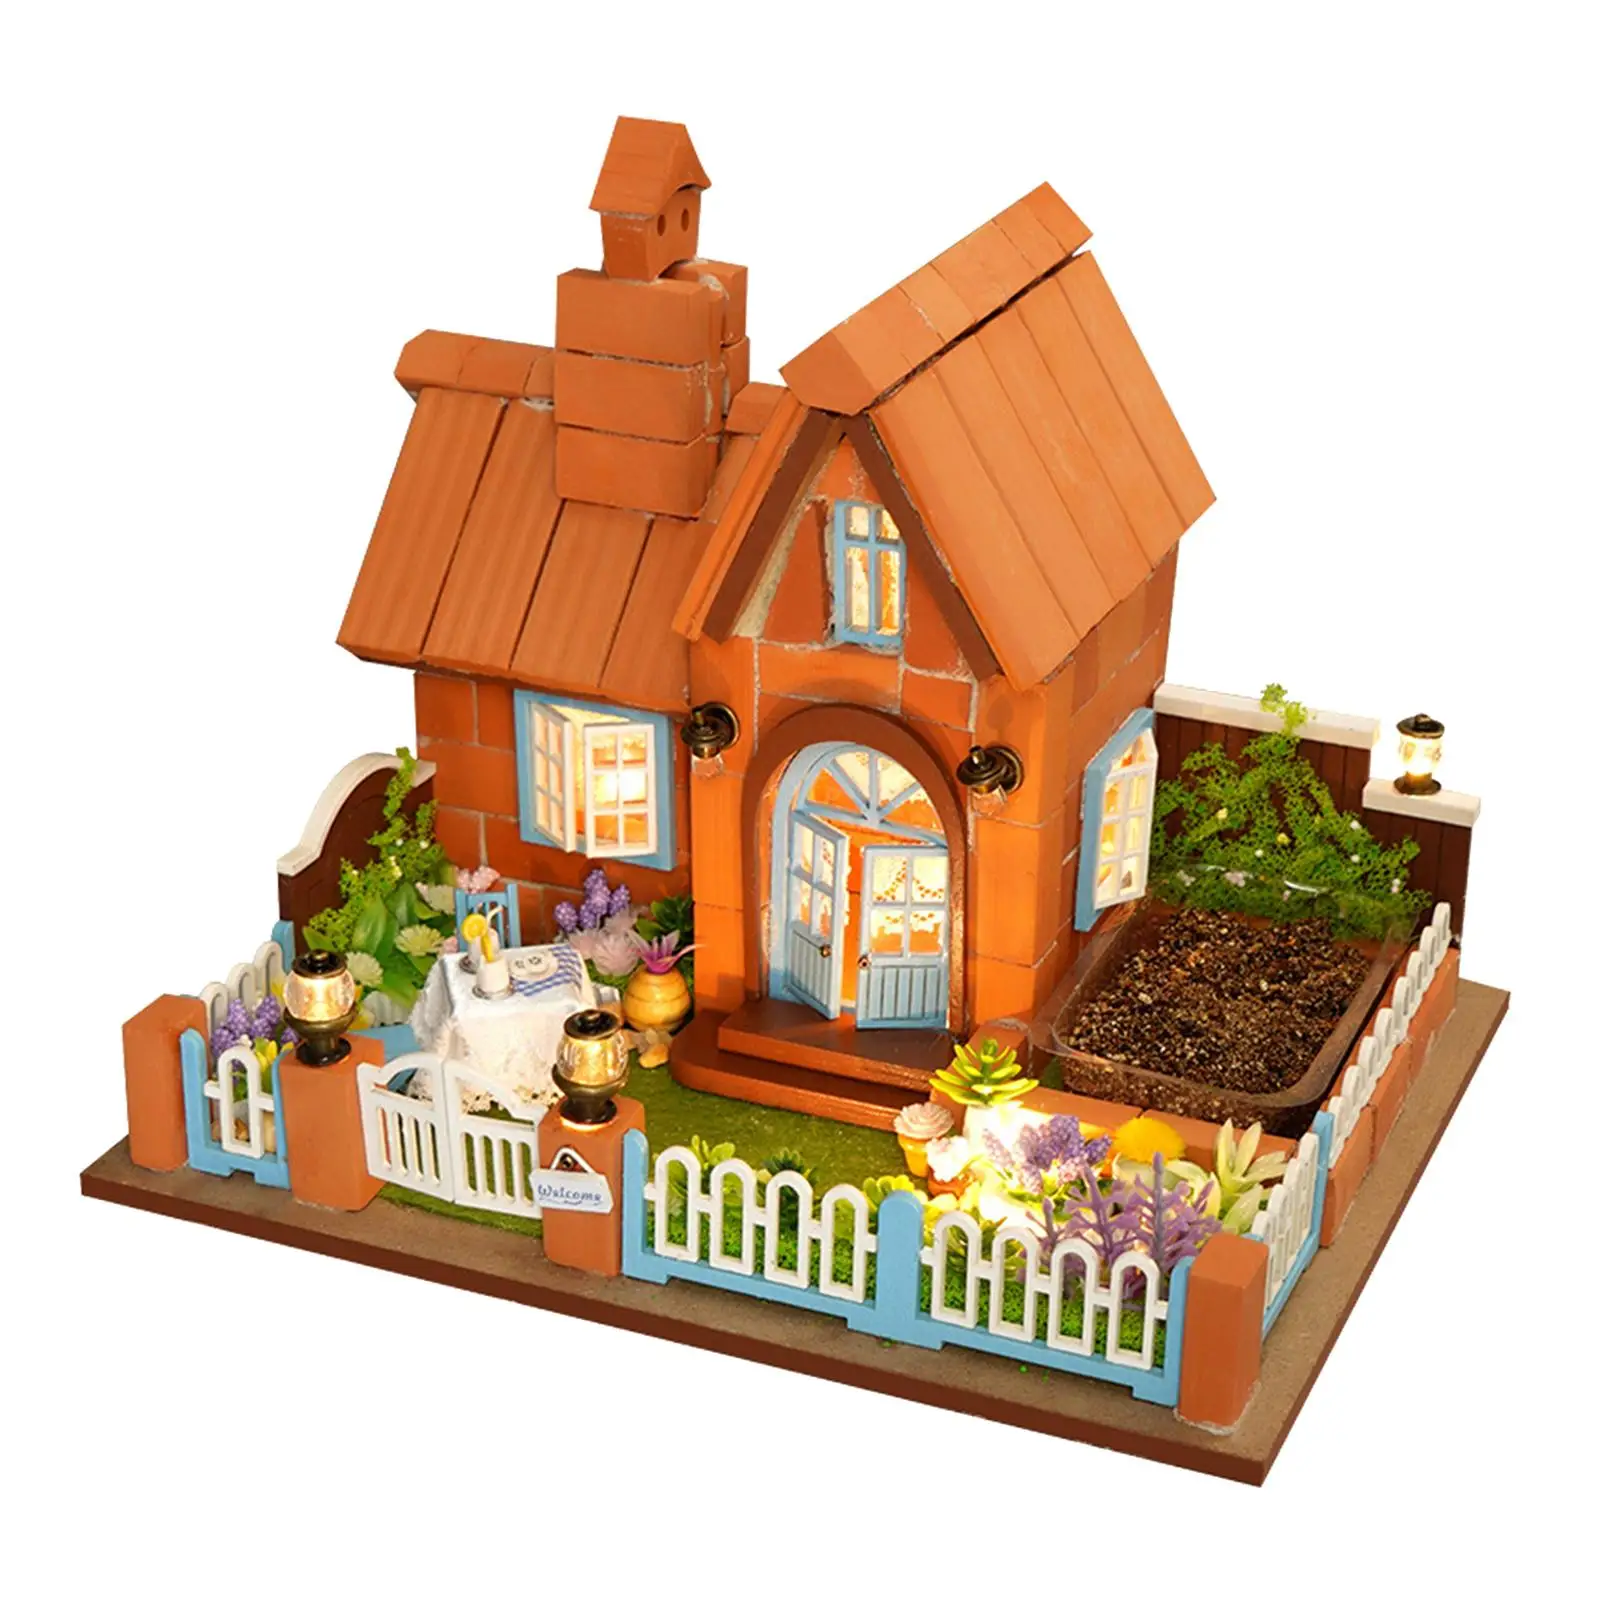 

dollhouse Miniature Handmade craft Model Mini House Crafts with Light Architecture Model Kits for Role Play DIY Model